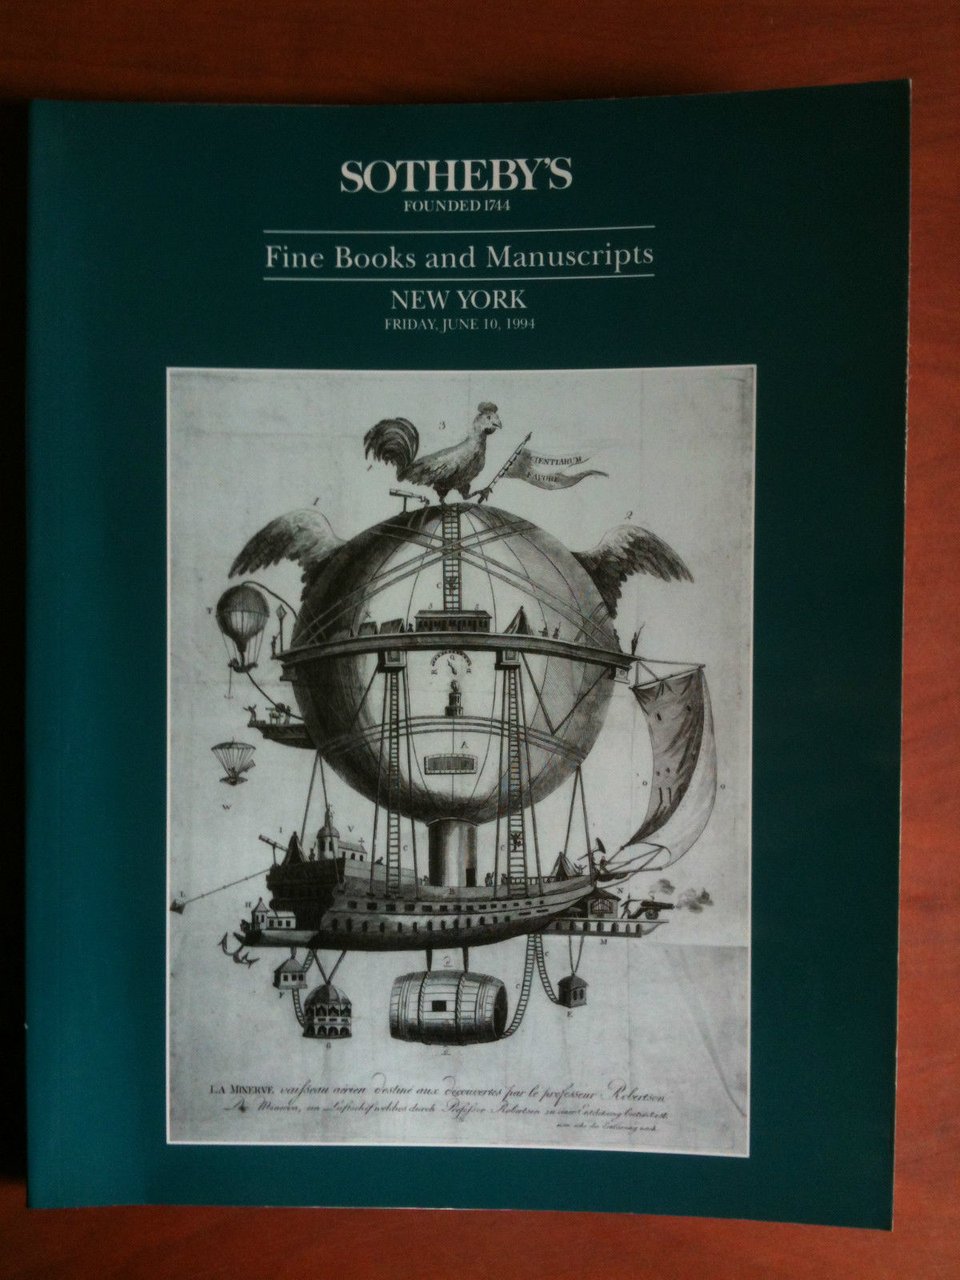 Auction catalogue Sotheby's Fine Books and Manuscripts New York 1994